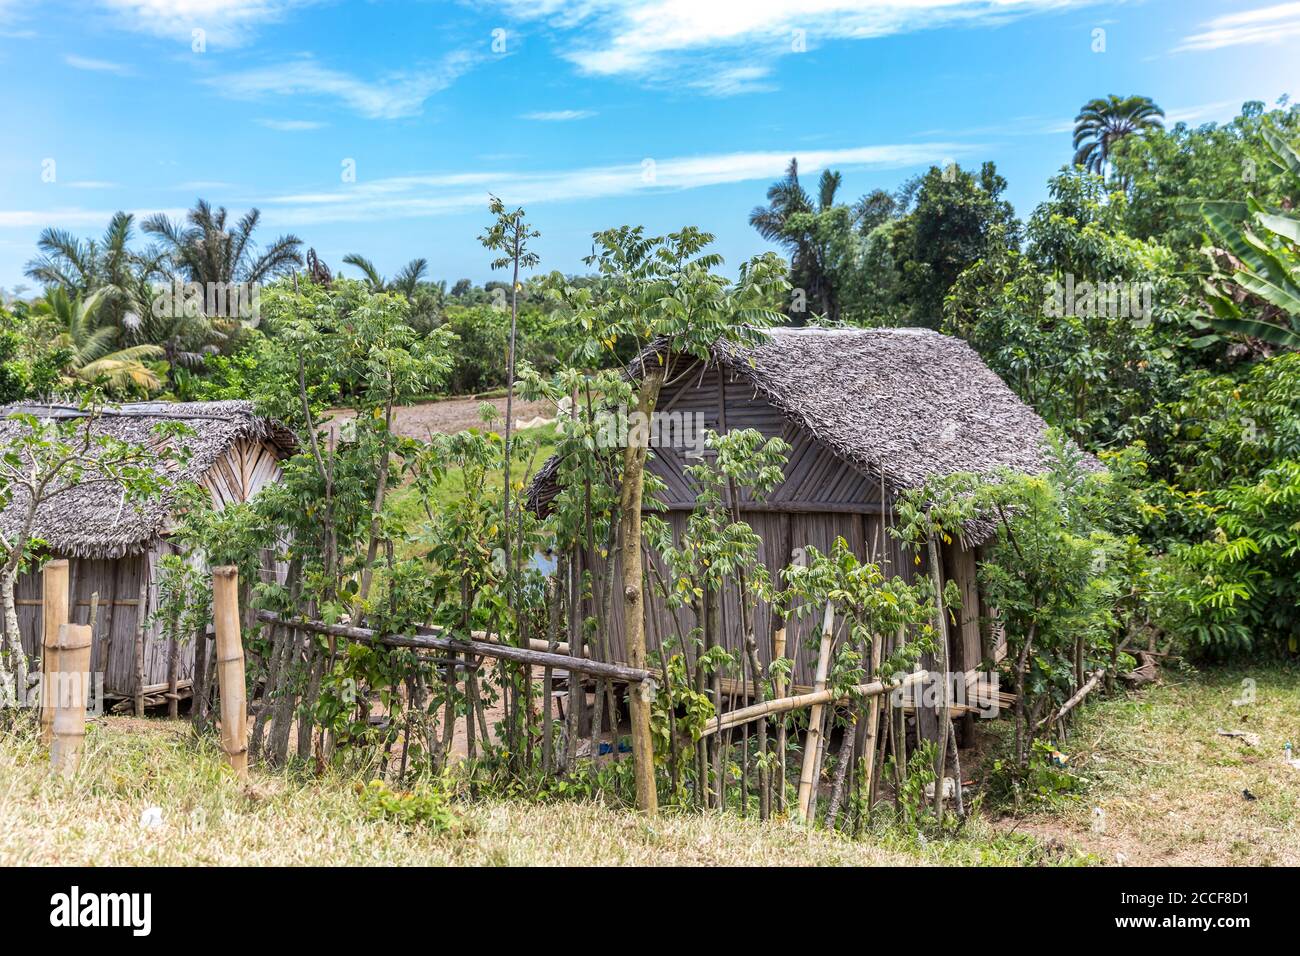 Simple wooden hut covered with palm leaves, bamboo fence, Ivoloina, Taomasina, Tamatave, Madagascar, Africa, Indian Ocean Stock Photo